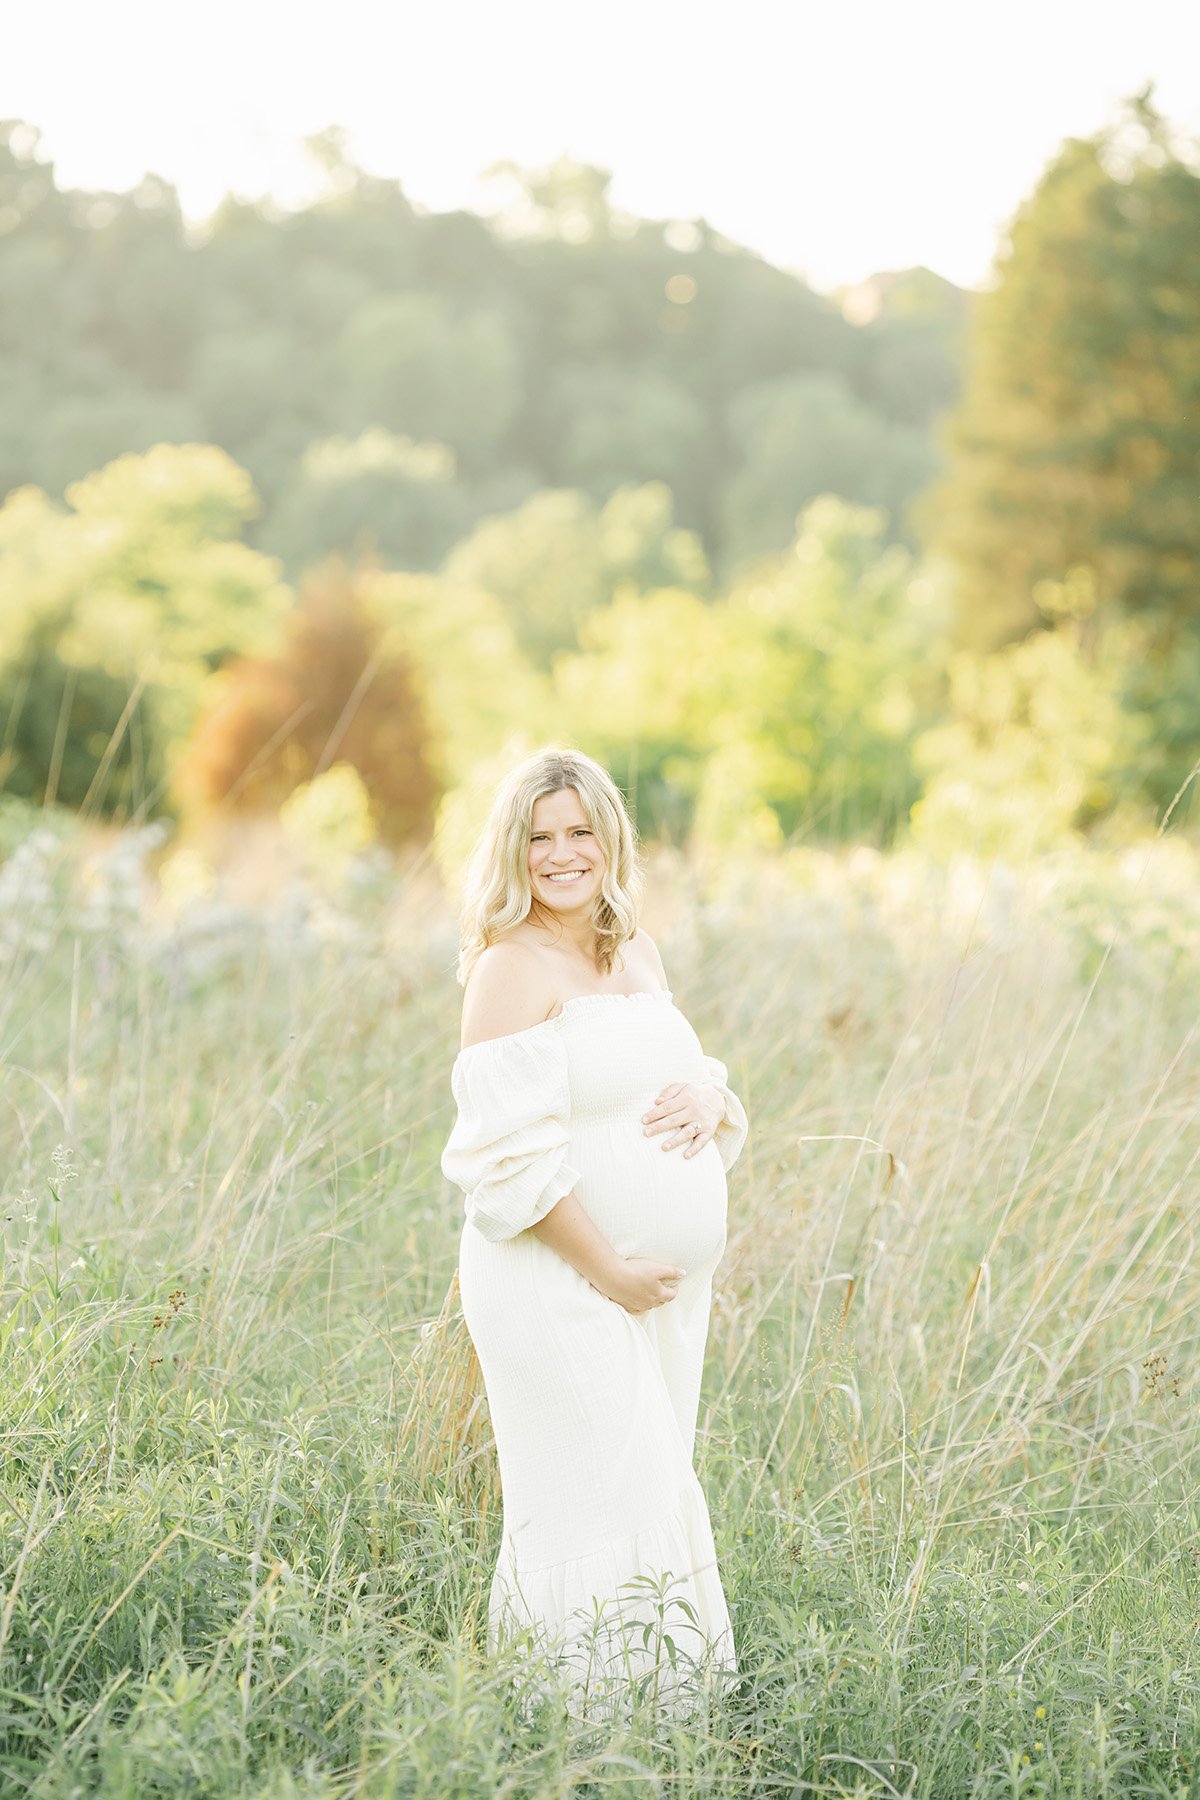 sunset pregnancy photo shoot in Louisville KY park with Julie Brock Photography